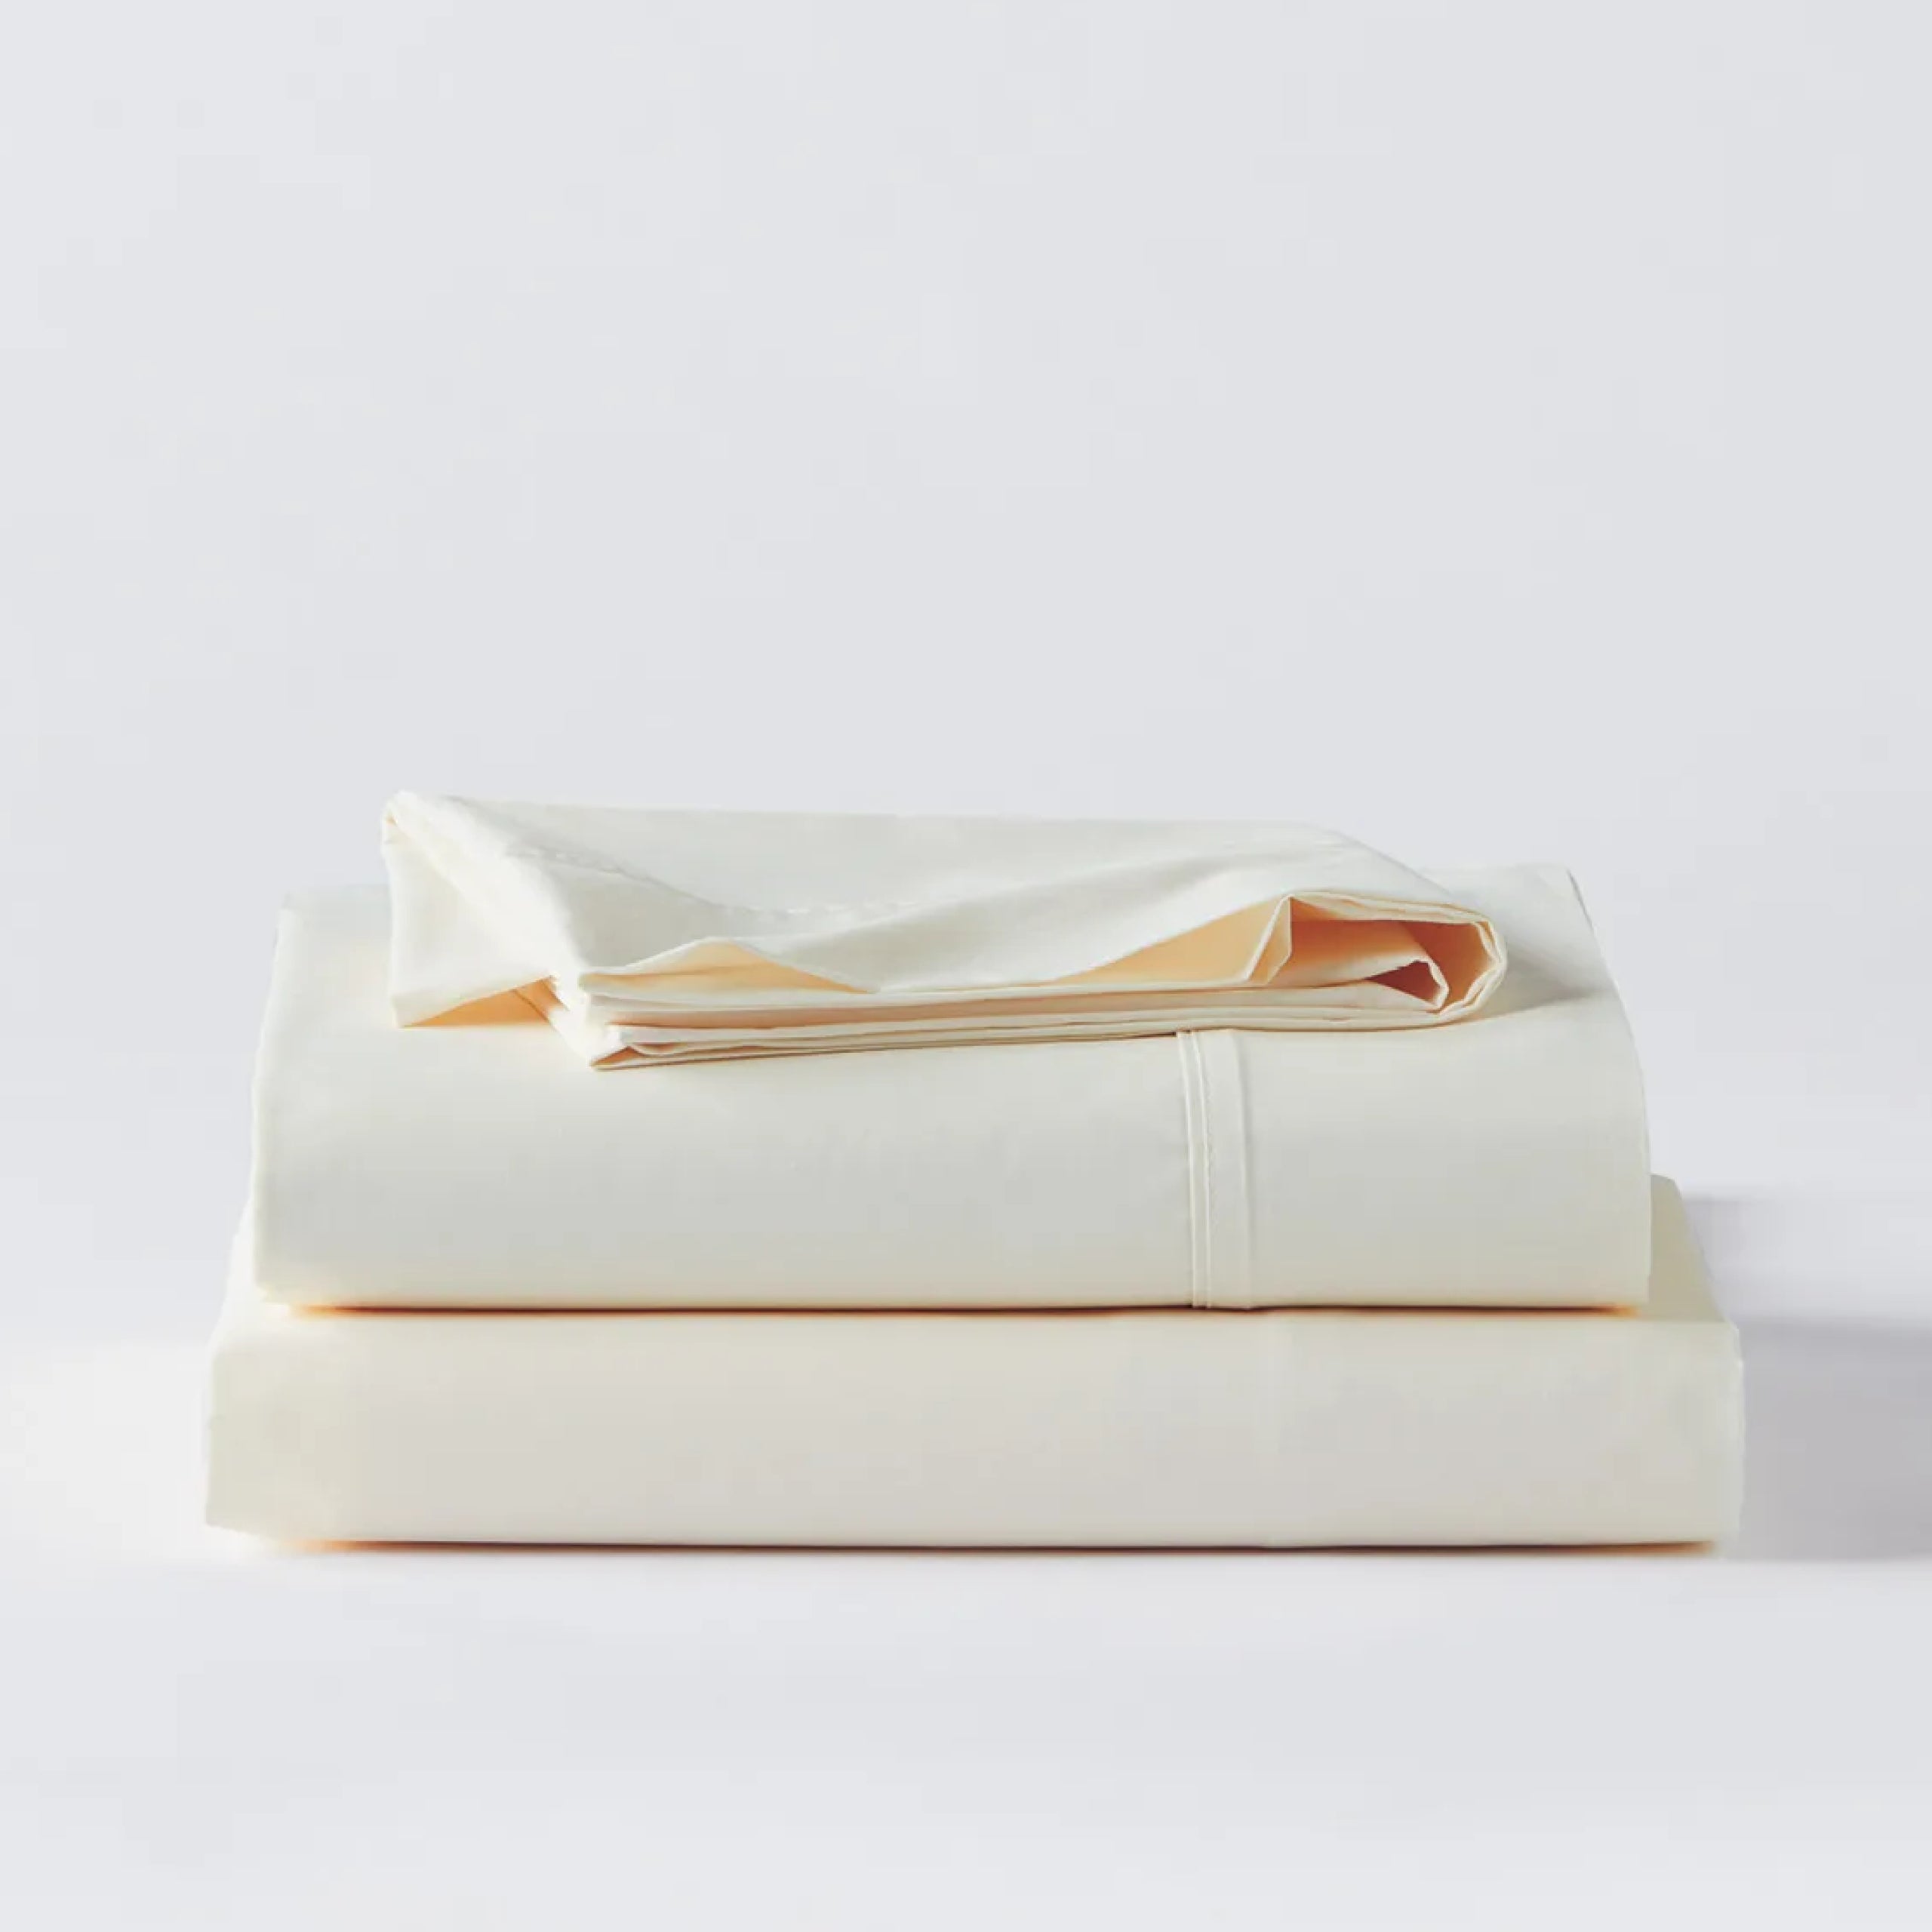 Premium Percale Ecru Sheets folded up on floor